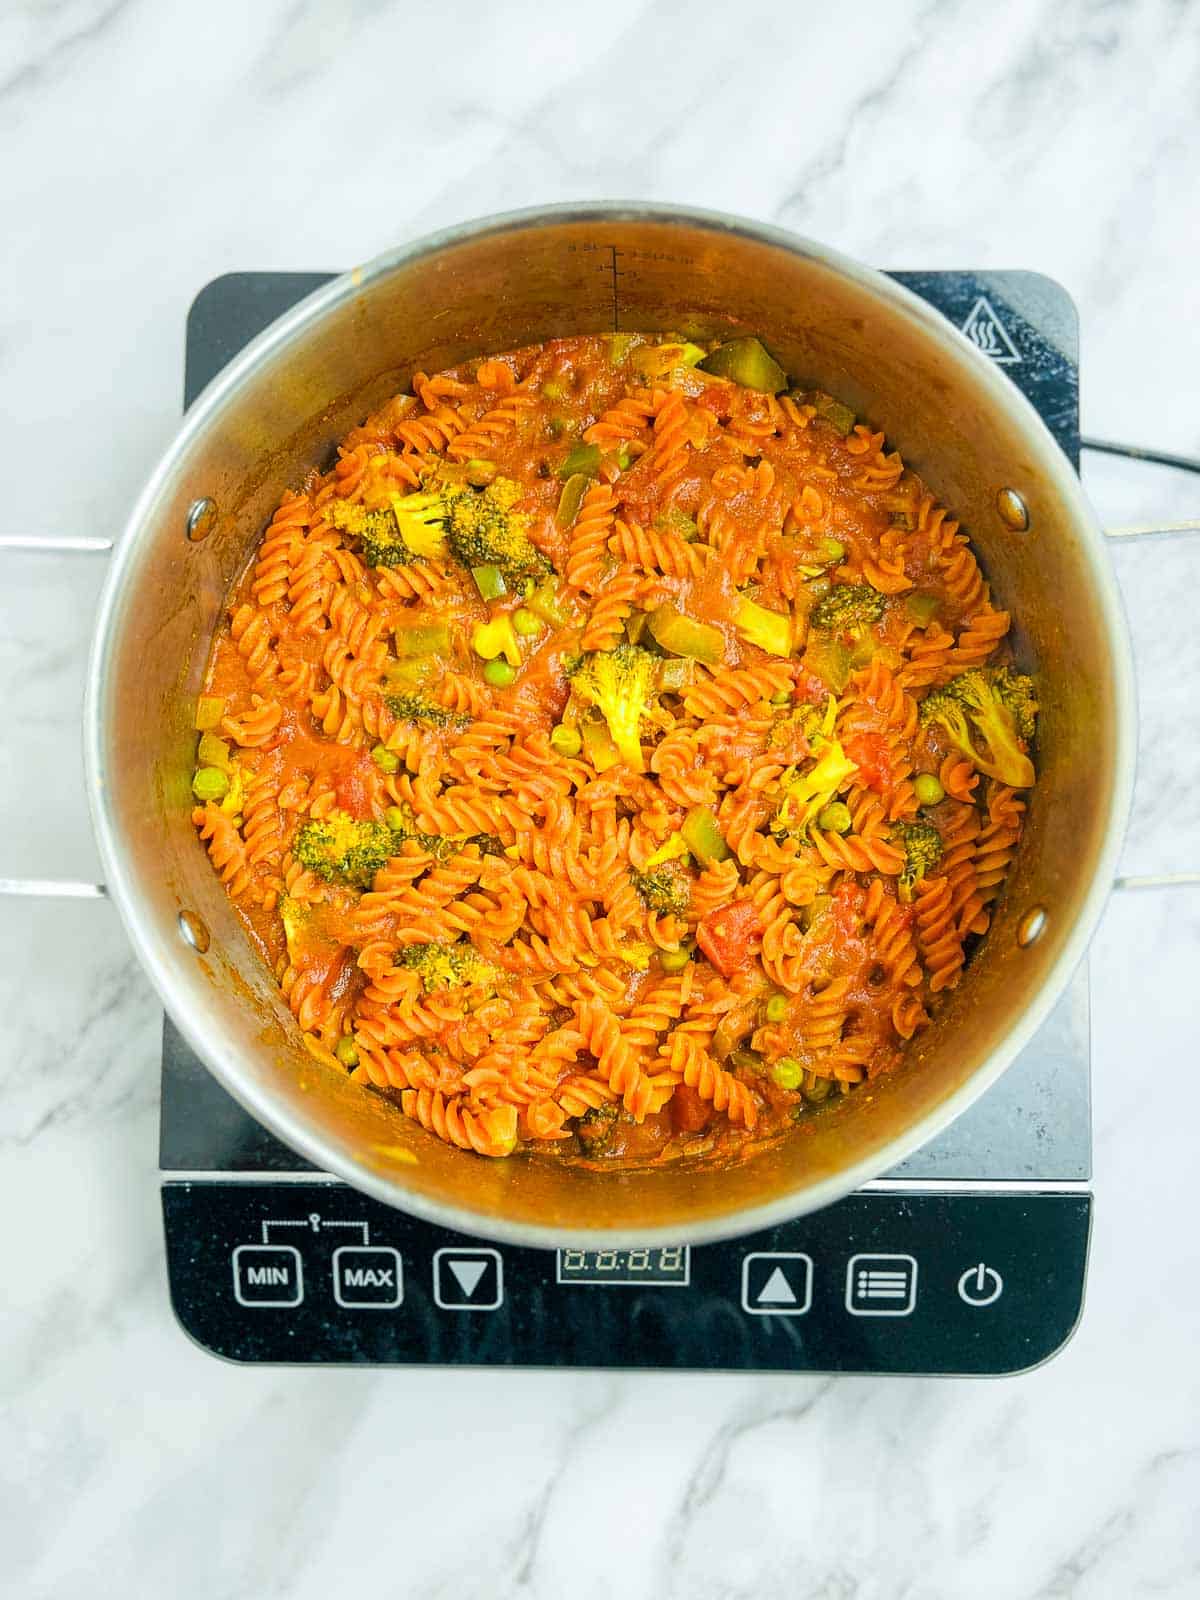 Red lentil pasta cooked with vegetables and tomato base.